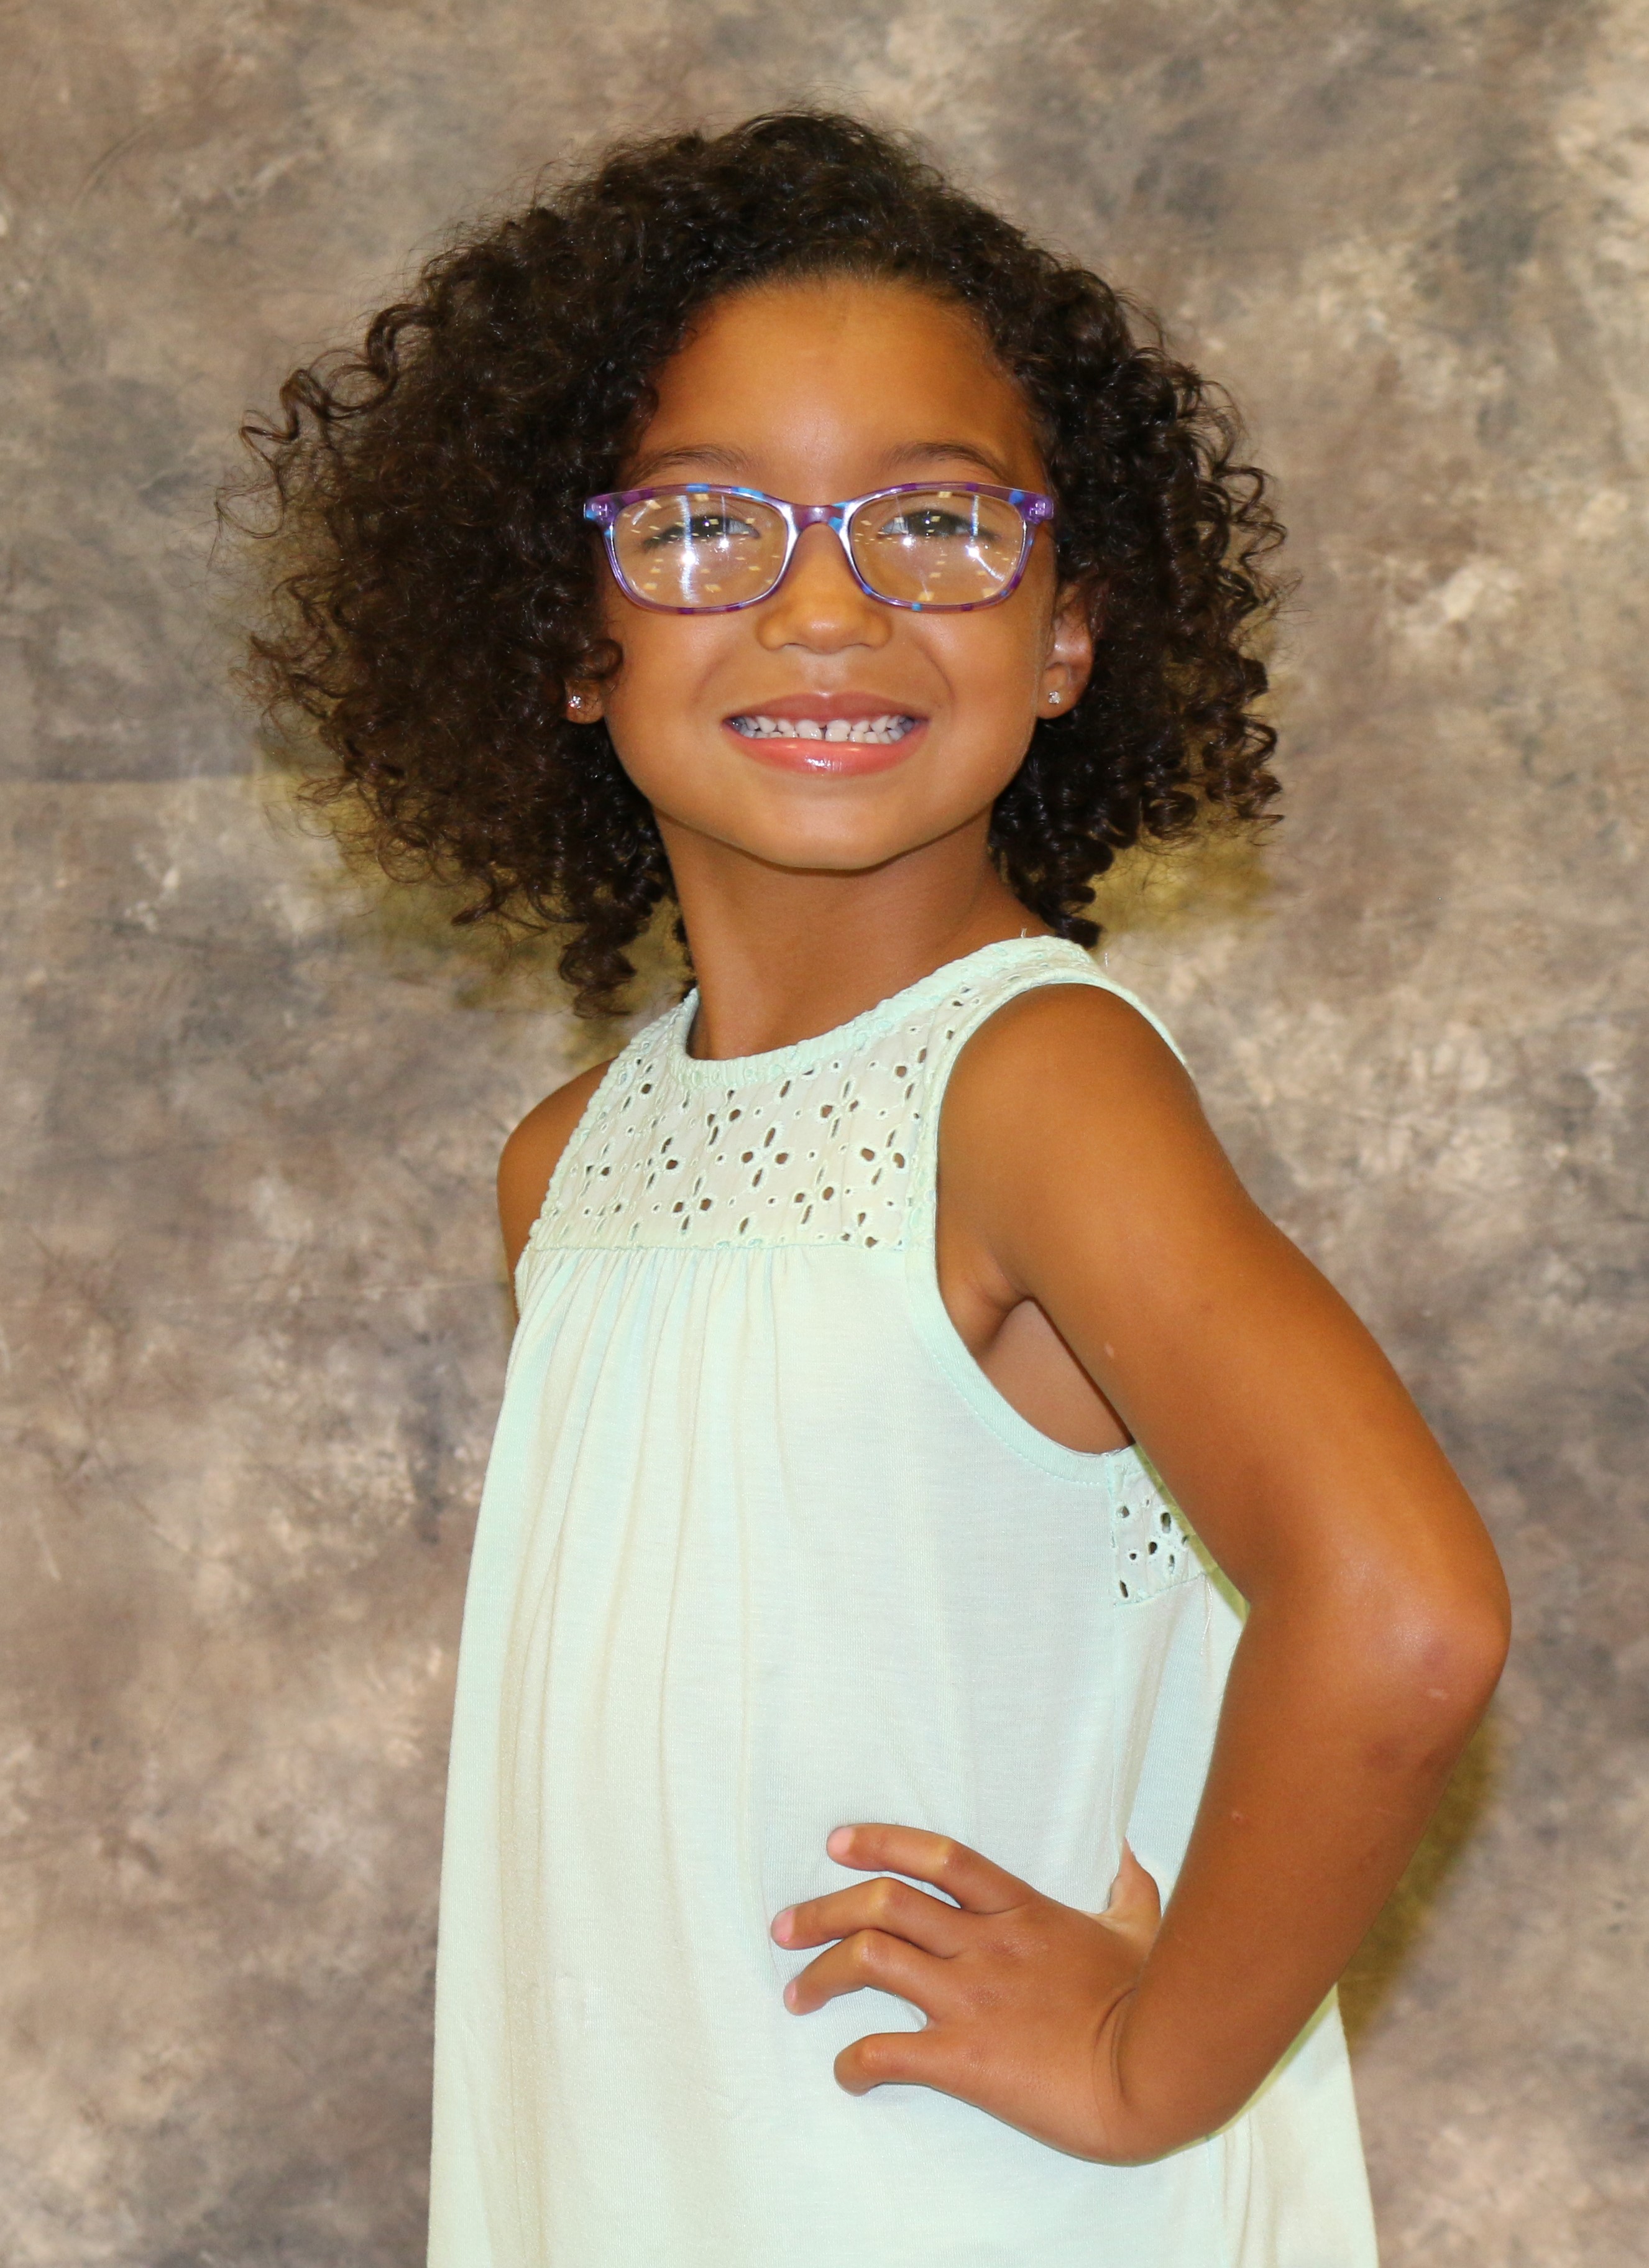 Little Miss Contestant - Hadleigh Crawford 5